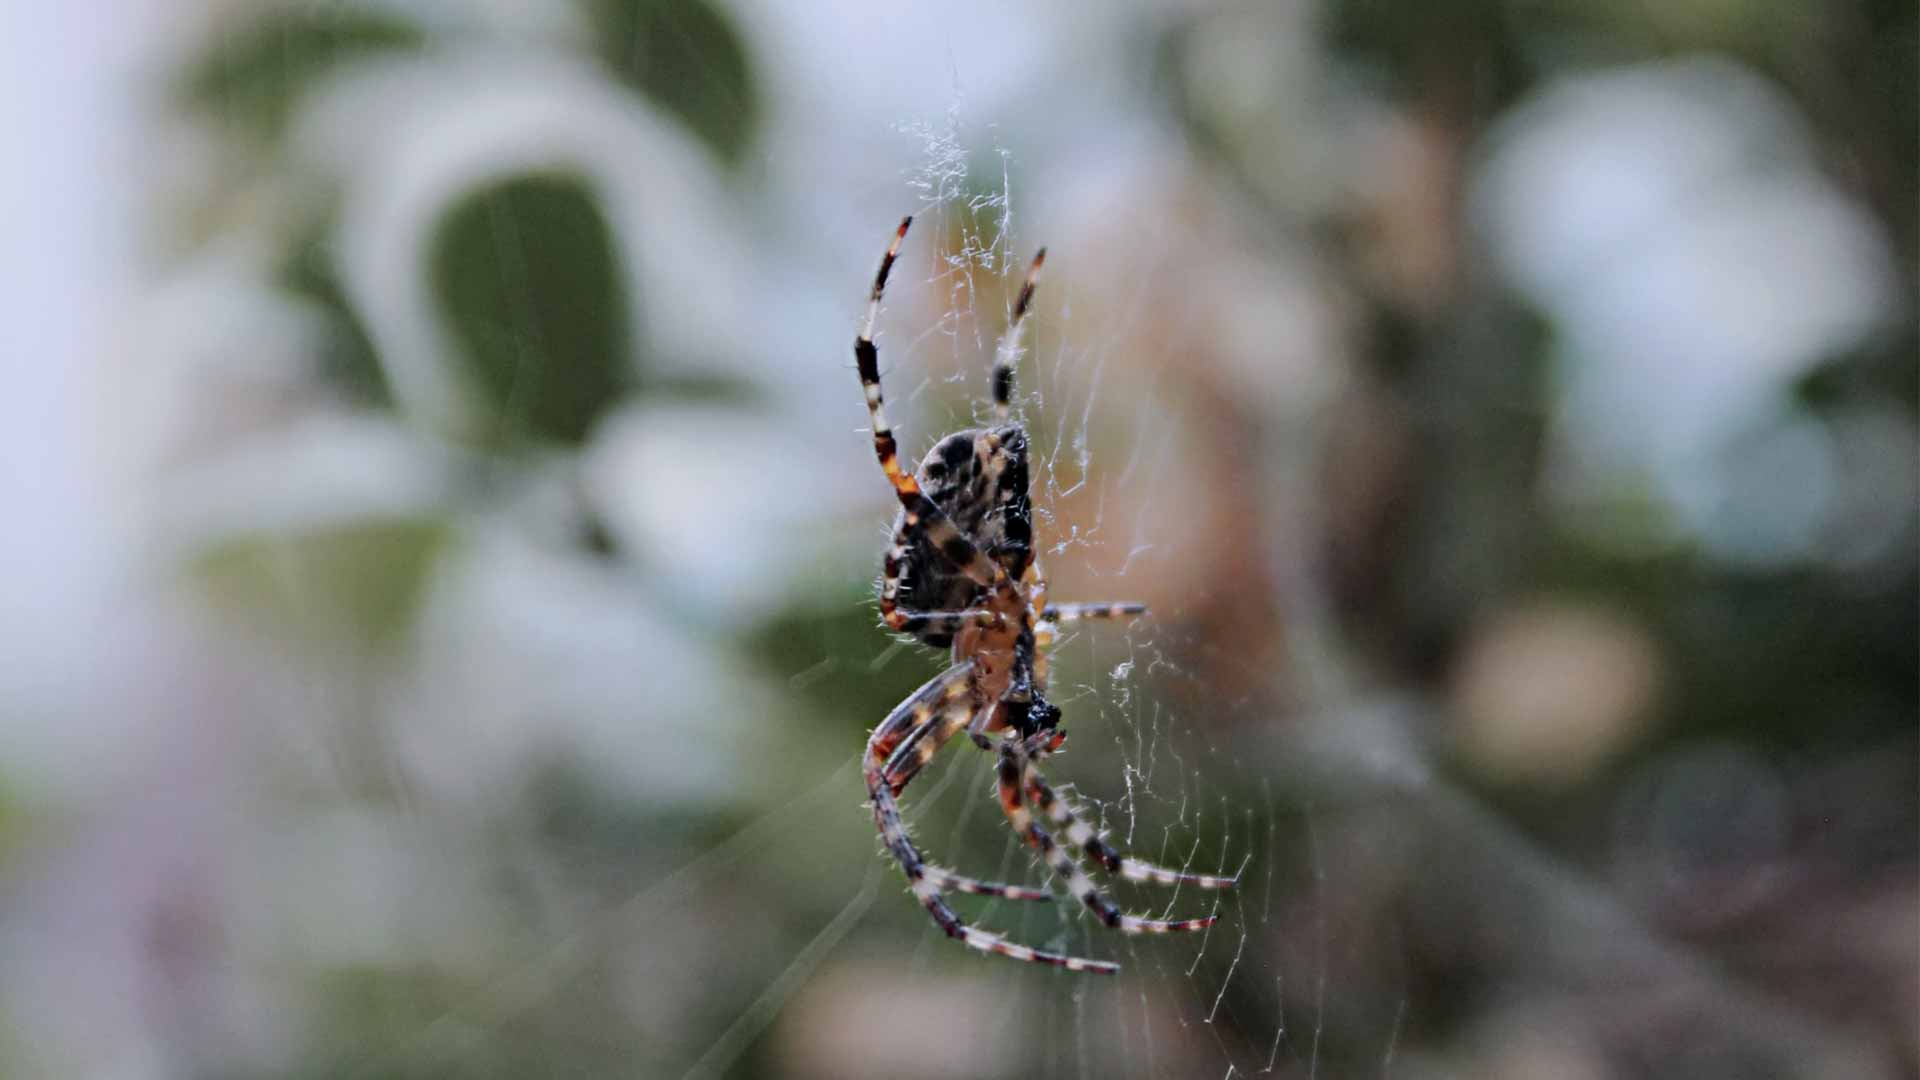 a spider in a web that will be removed through spider control